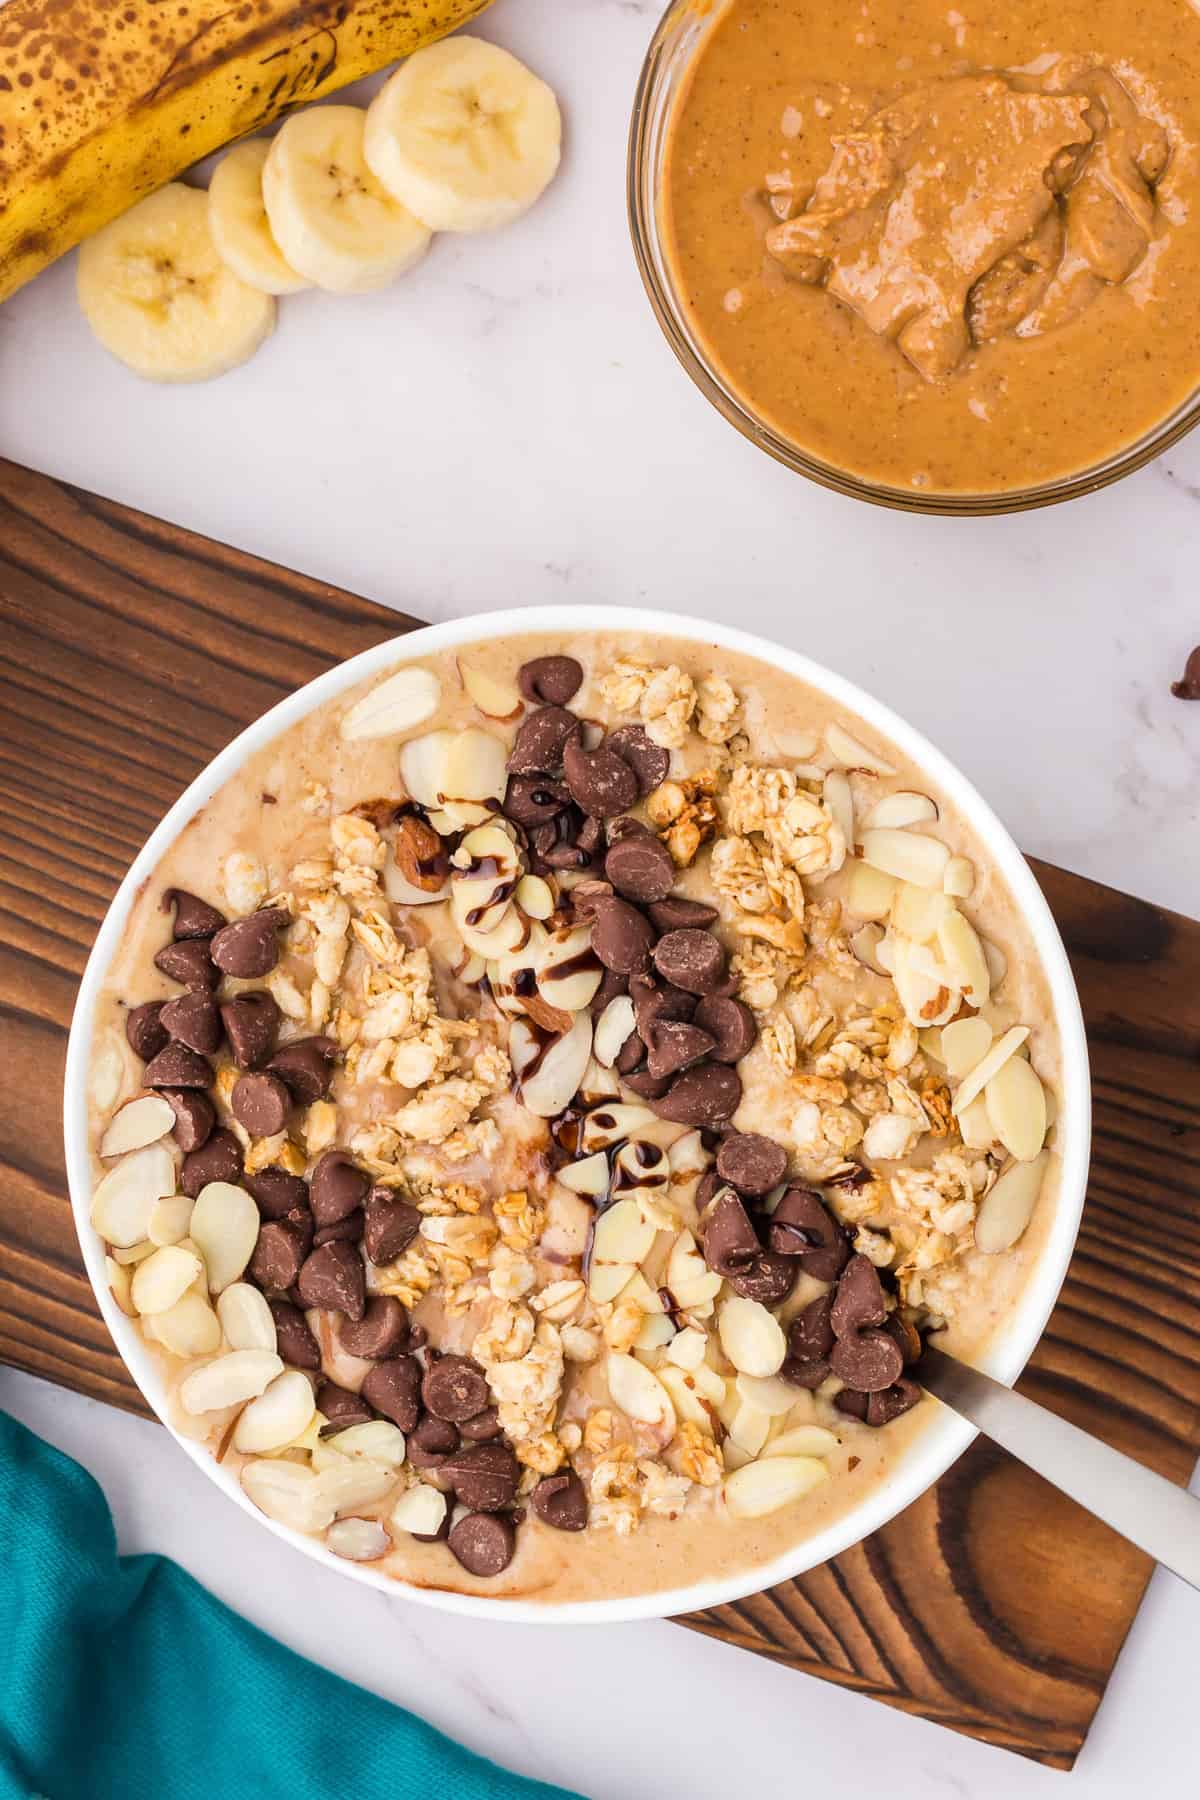 Overhead view of smoothie bowl with toppings.